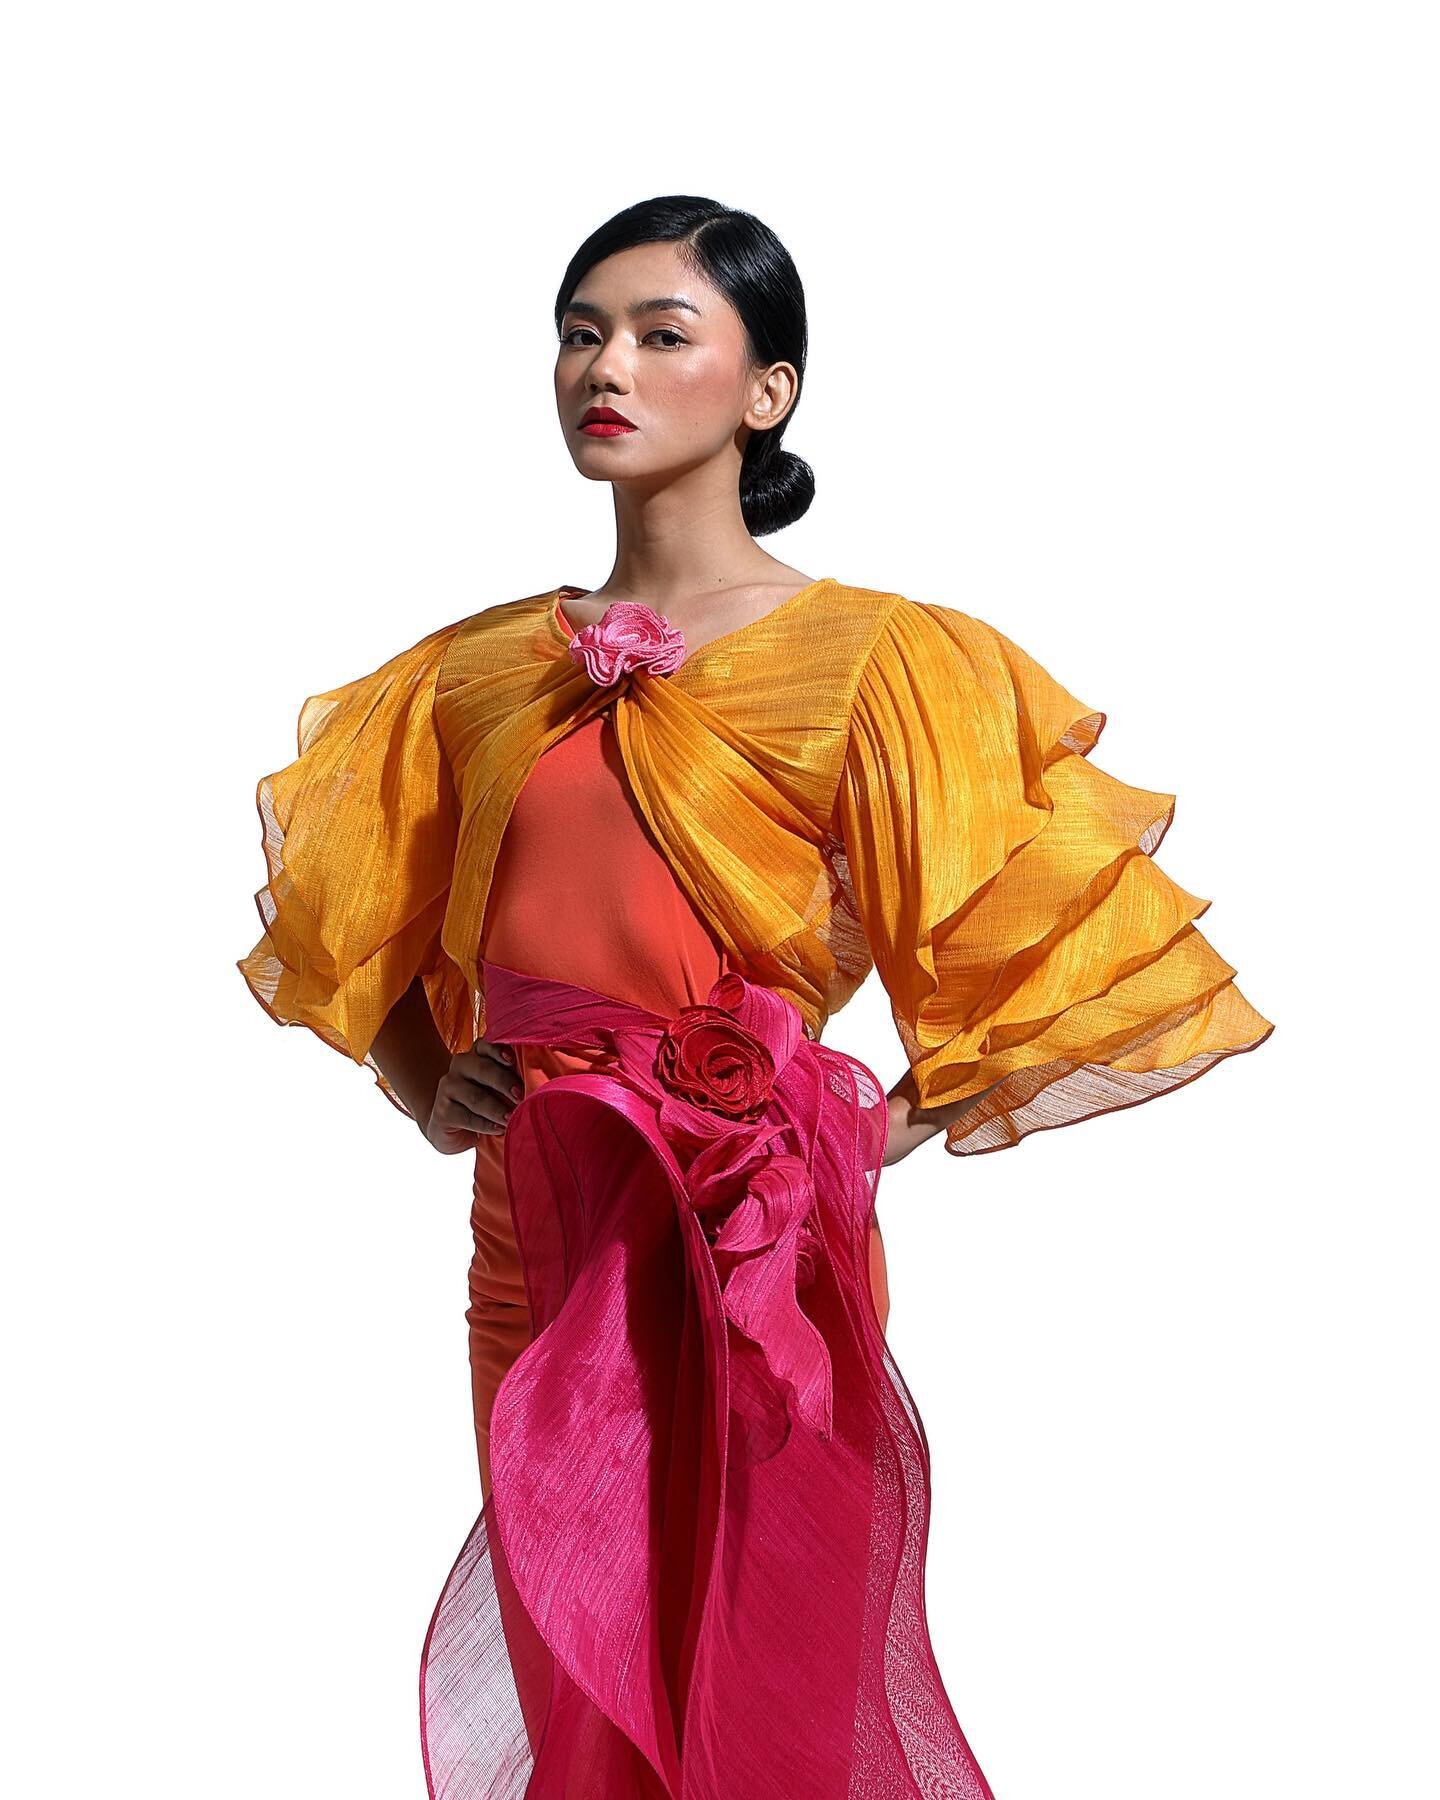 This glorious yellow number is definitely going to shine bright at the Fashion Forte Fashion Show! 

Join us for an evening of fun, friends, drinks and FASHION!

Date: March 21, 2024-7:00 PM
Where: Crowne Plaza Manila Galleria
&mdash;
Photography: @a